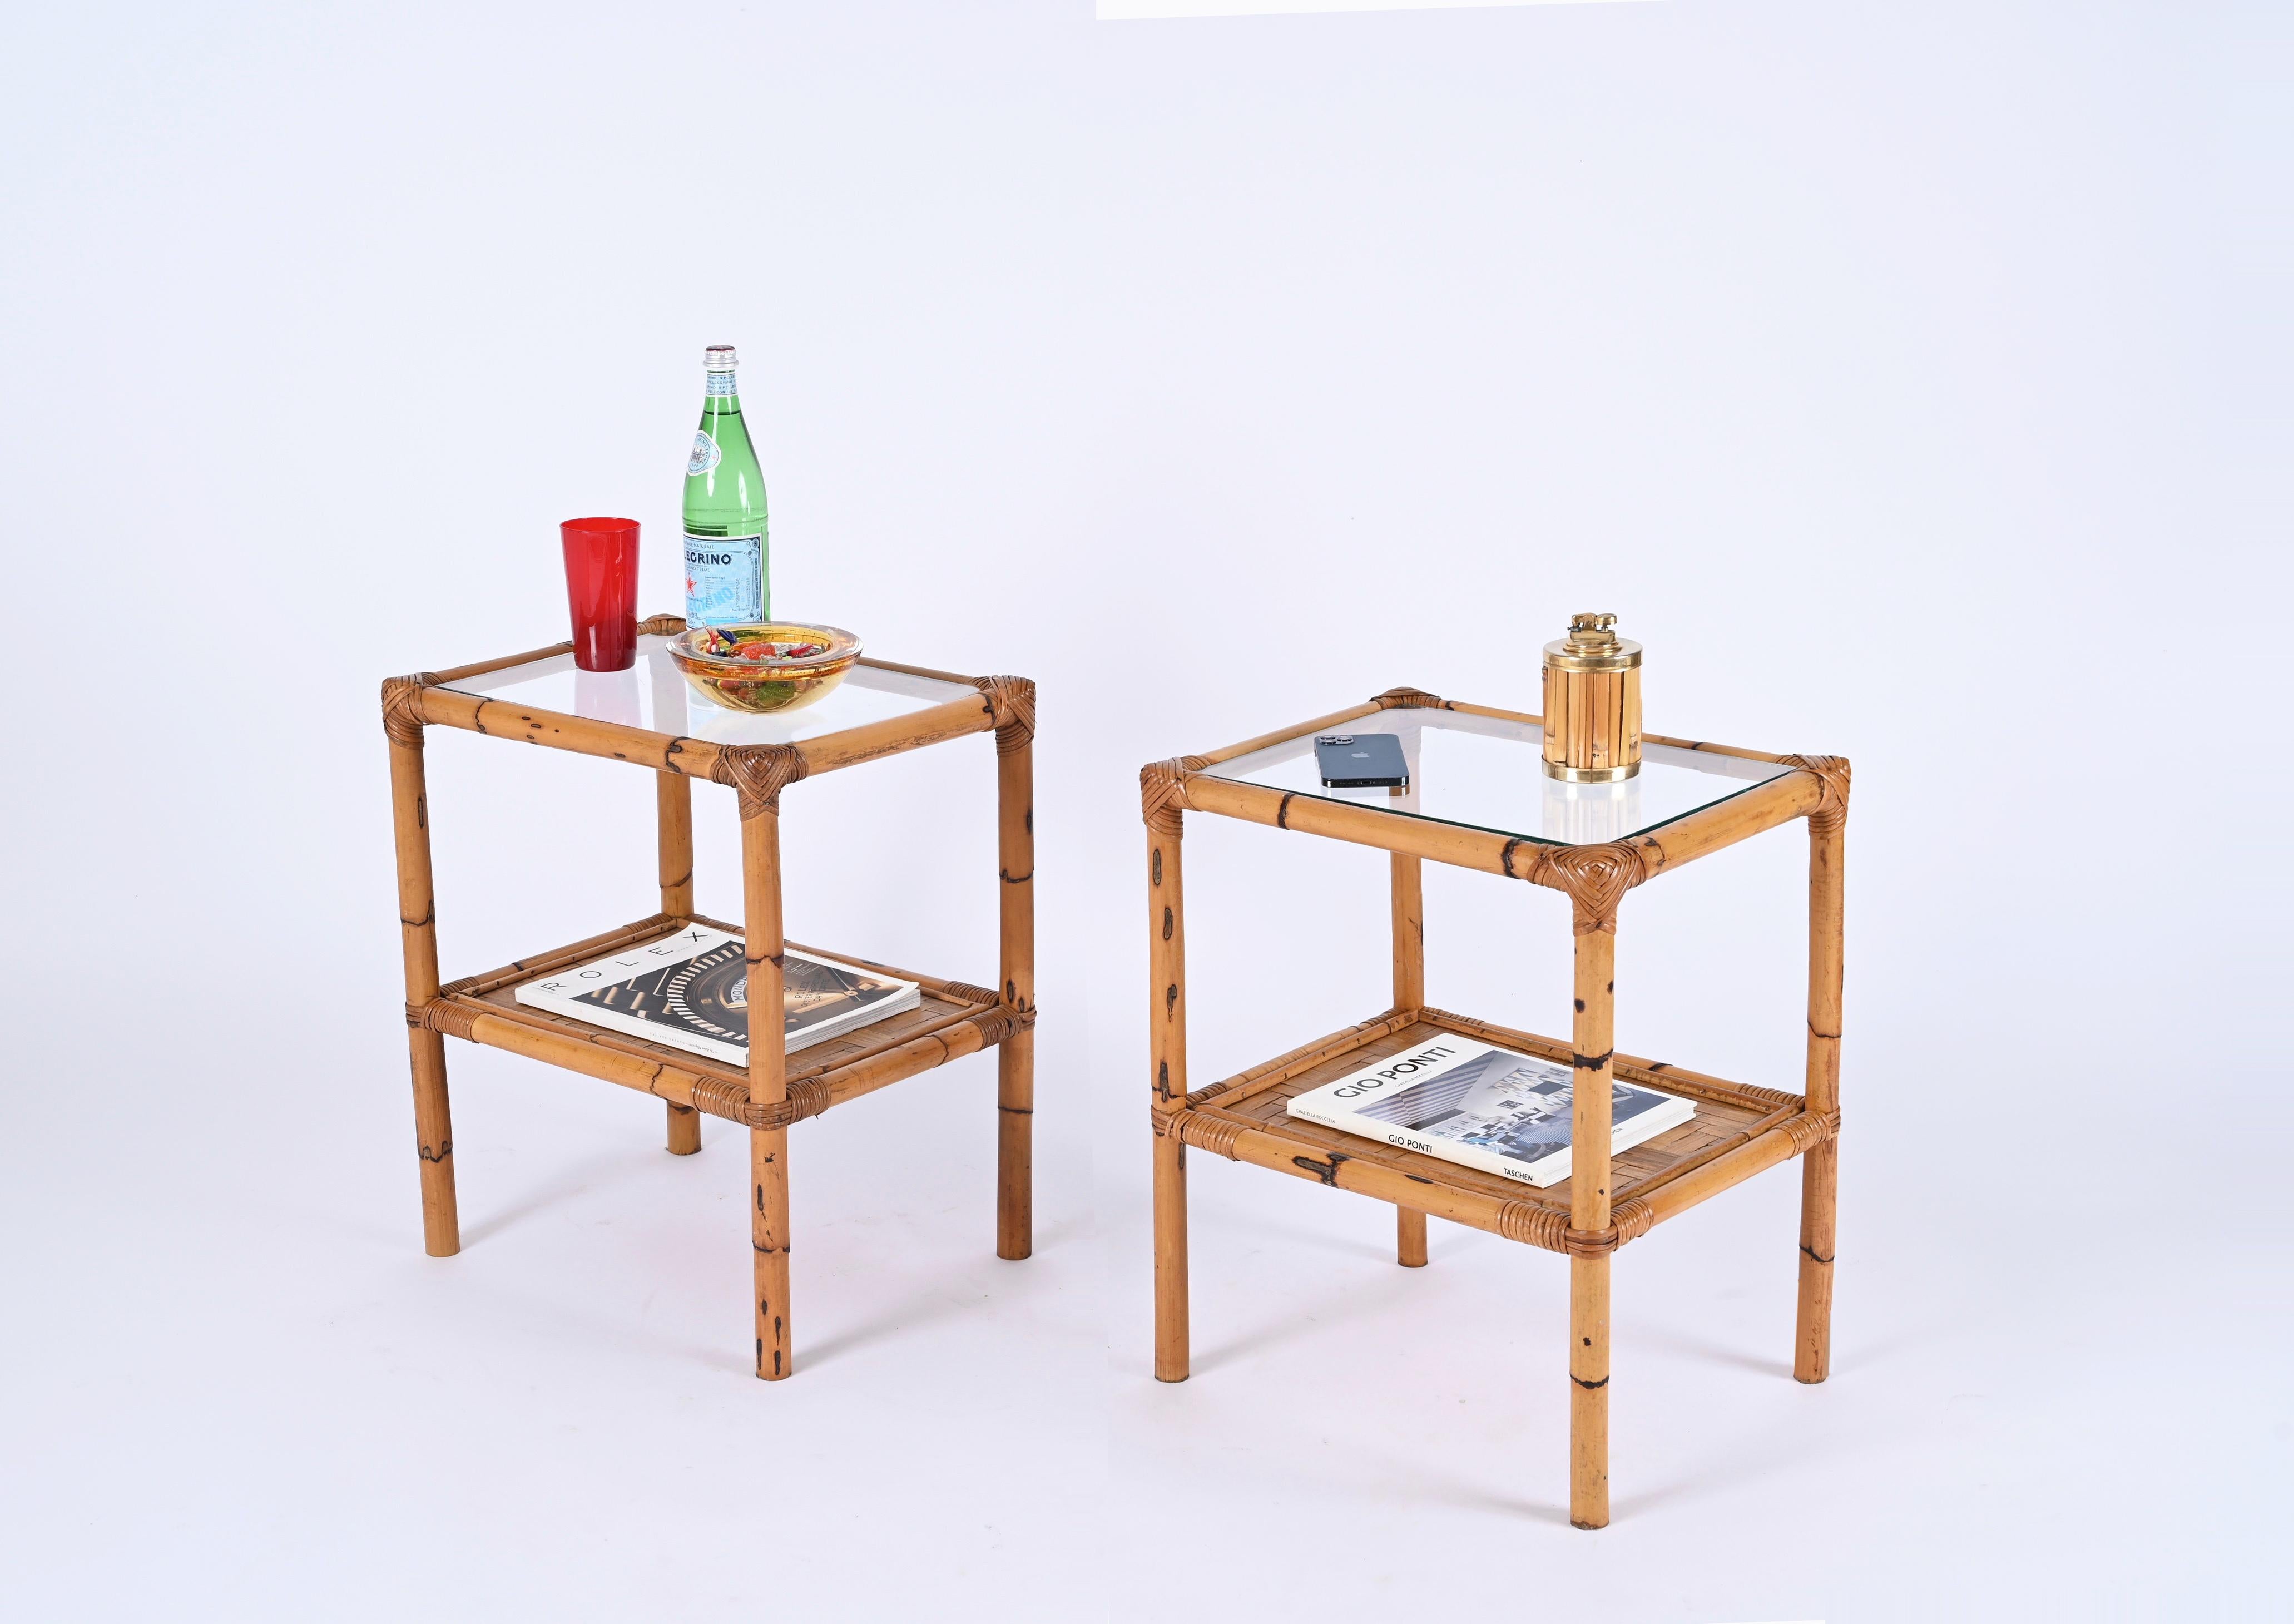 Pair of Mid-Century Italian Bedside Tables in Bamboo, Rattan and Glass, 1970s For Sale 1